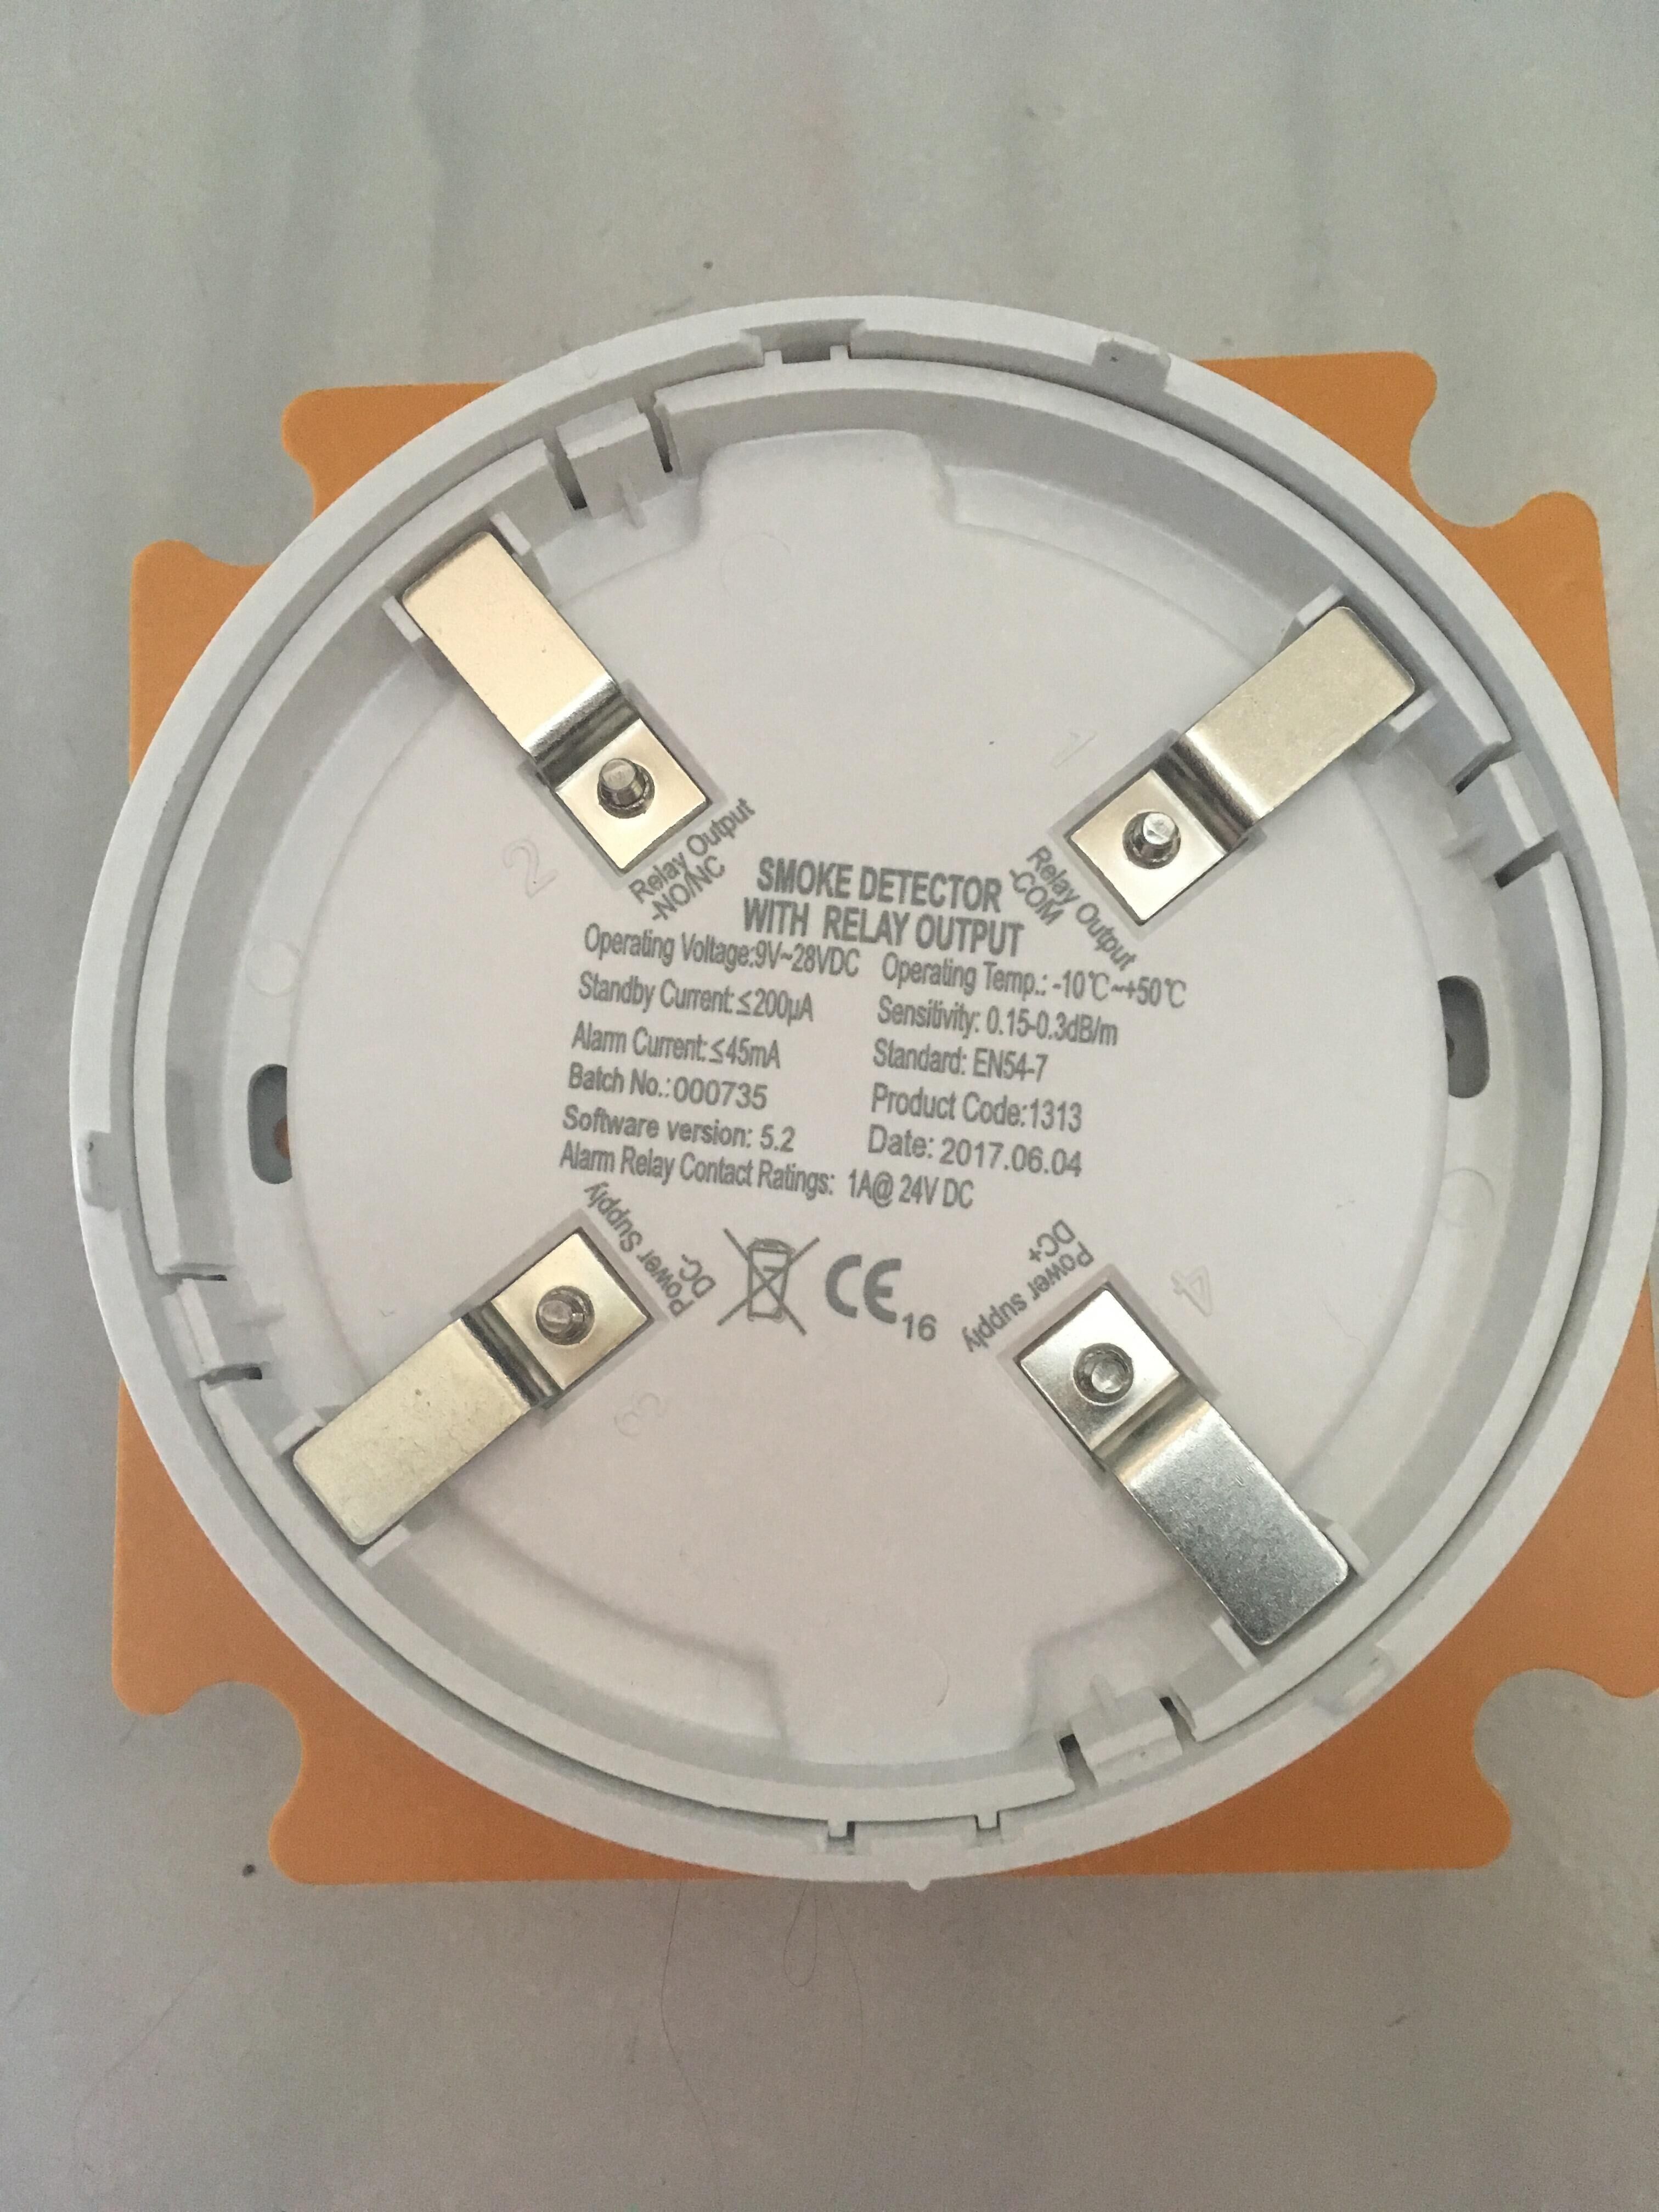 Smoke Detector 4-wire with relay output DC powered 